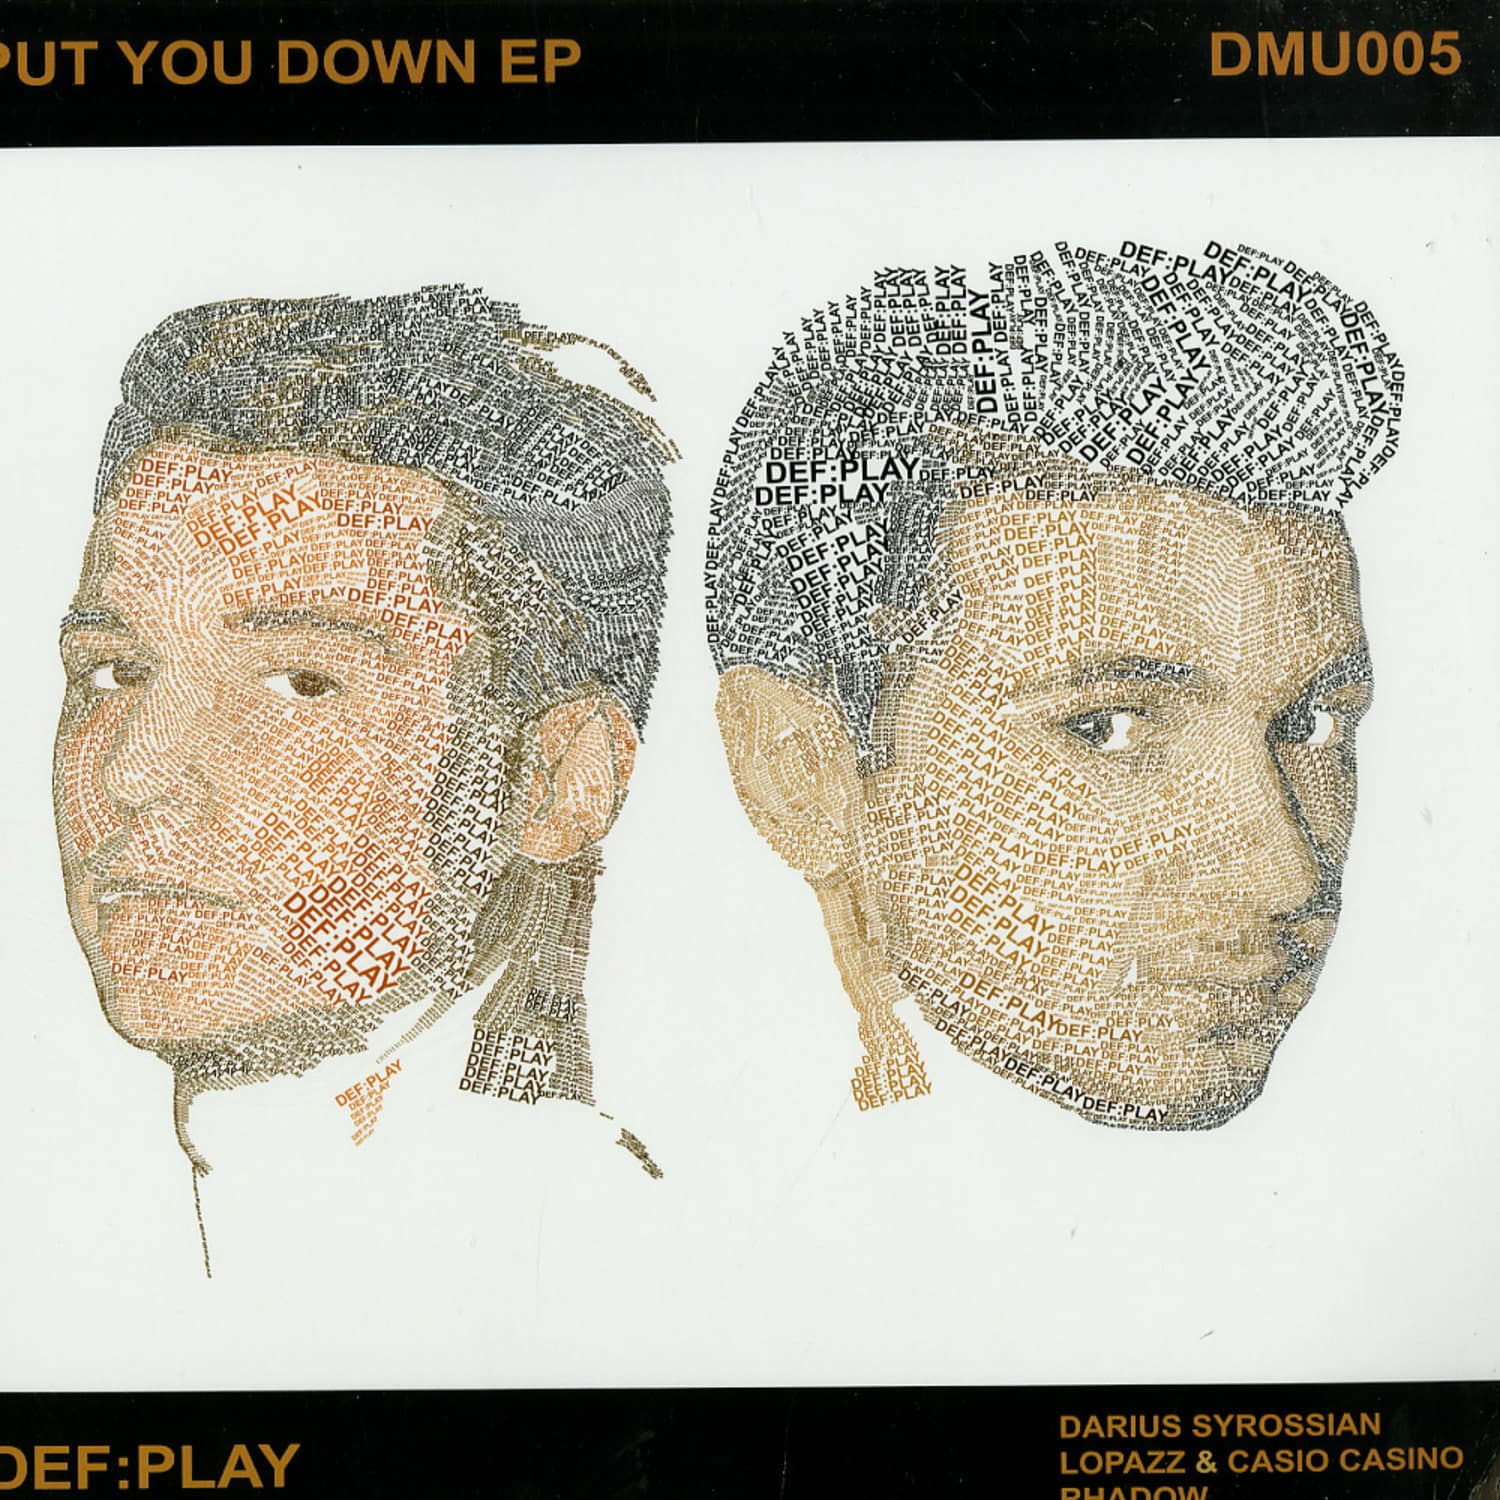 Def:play - PUT YOU DOWN EP